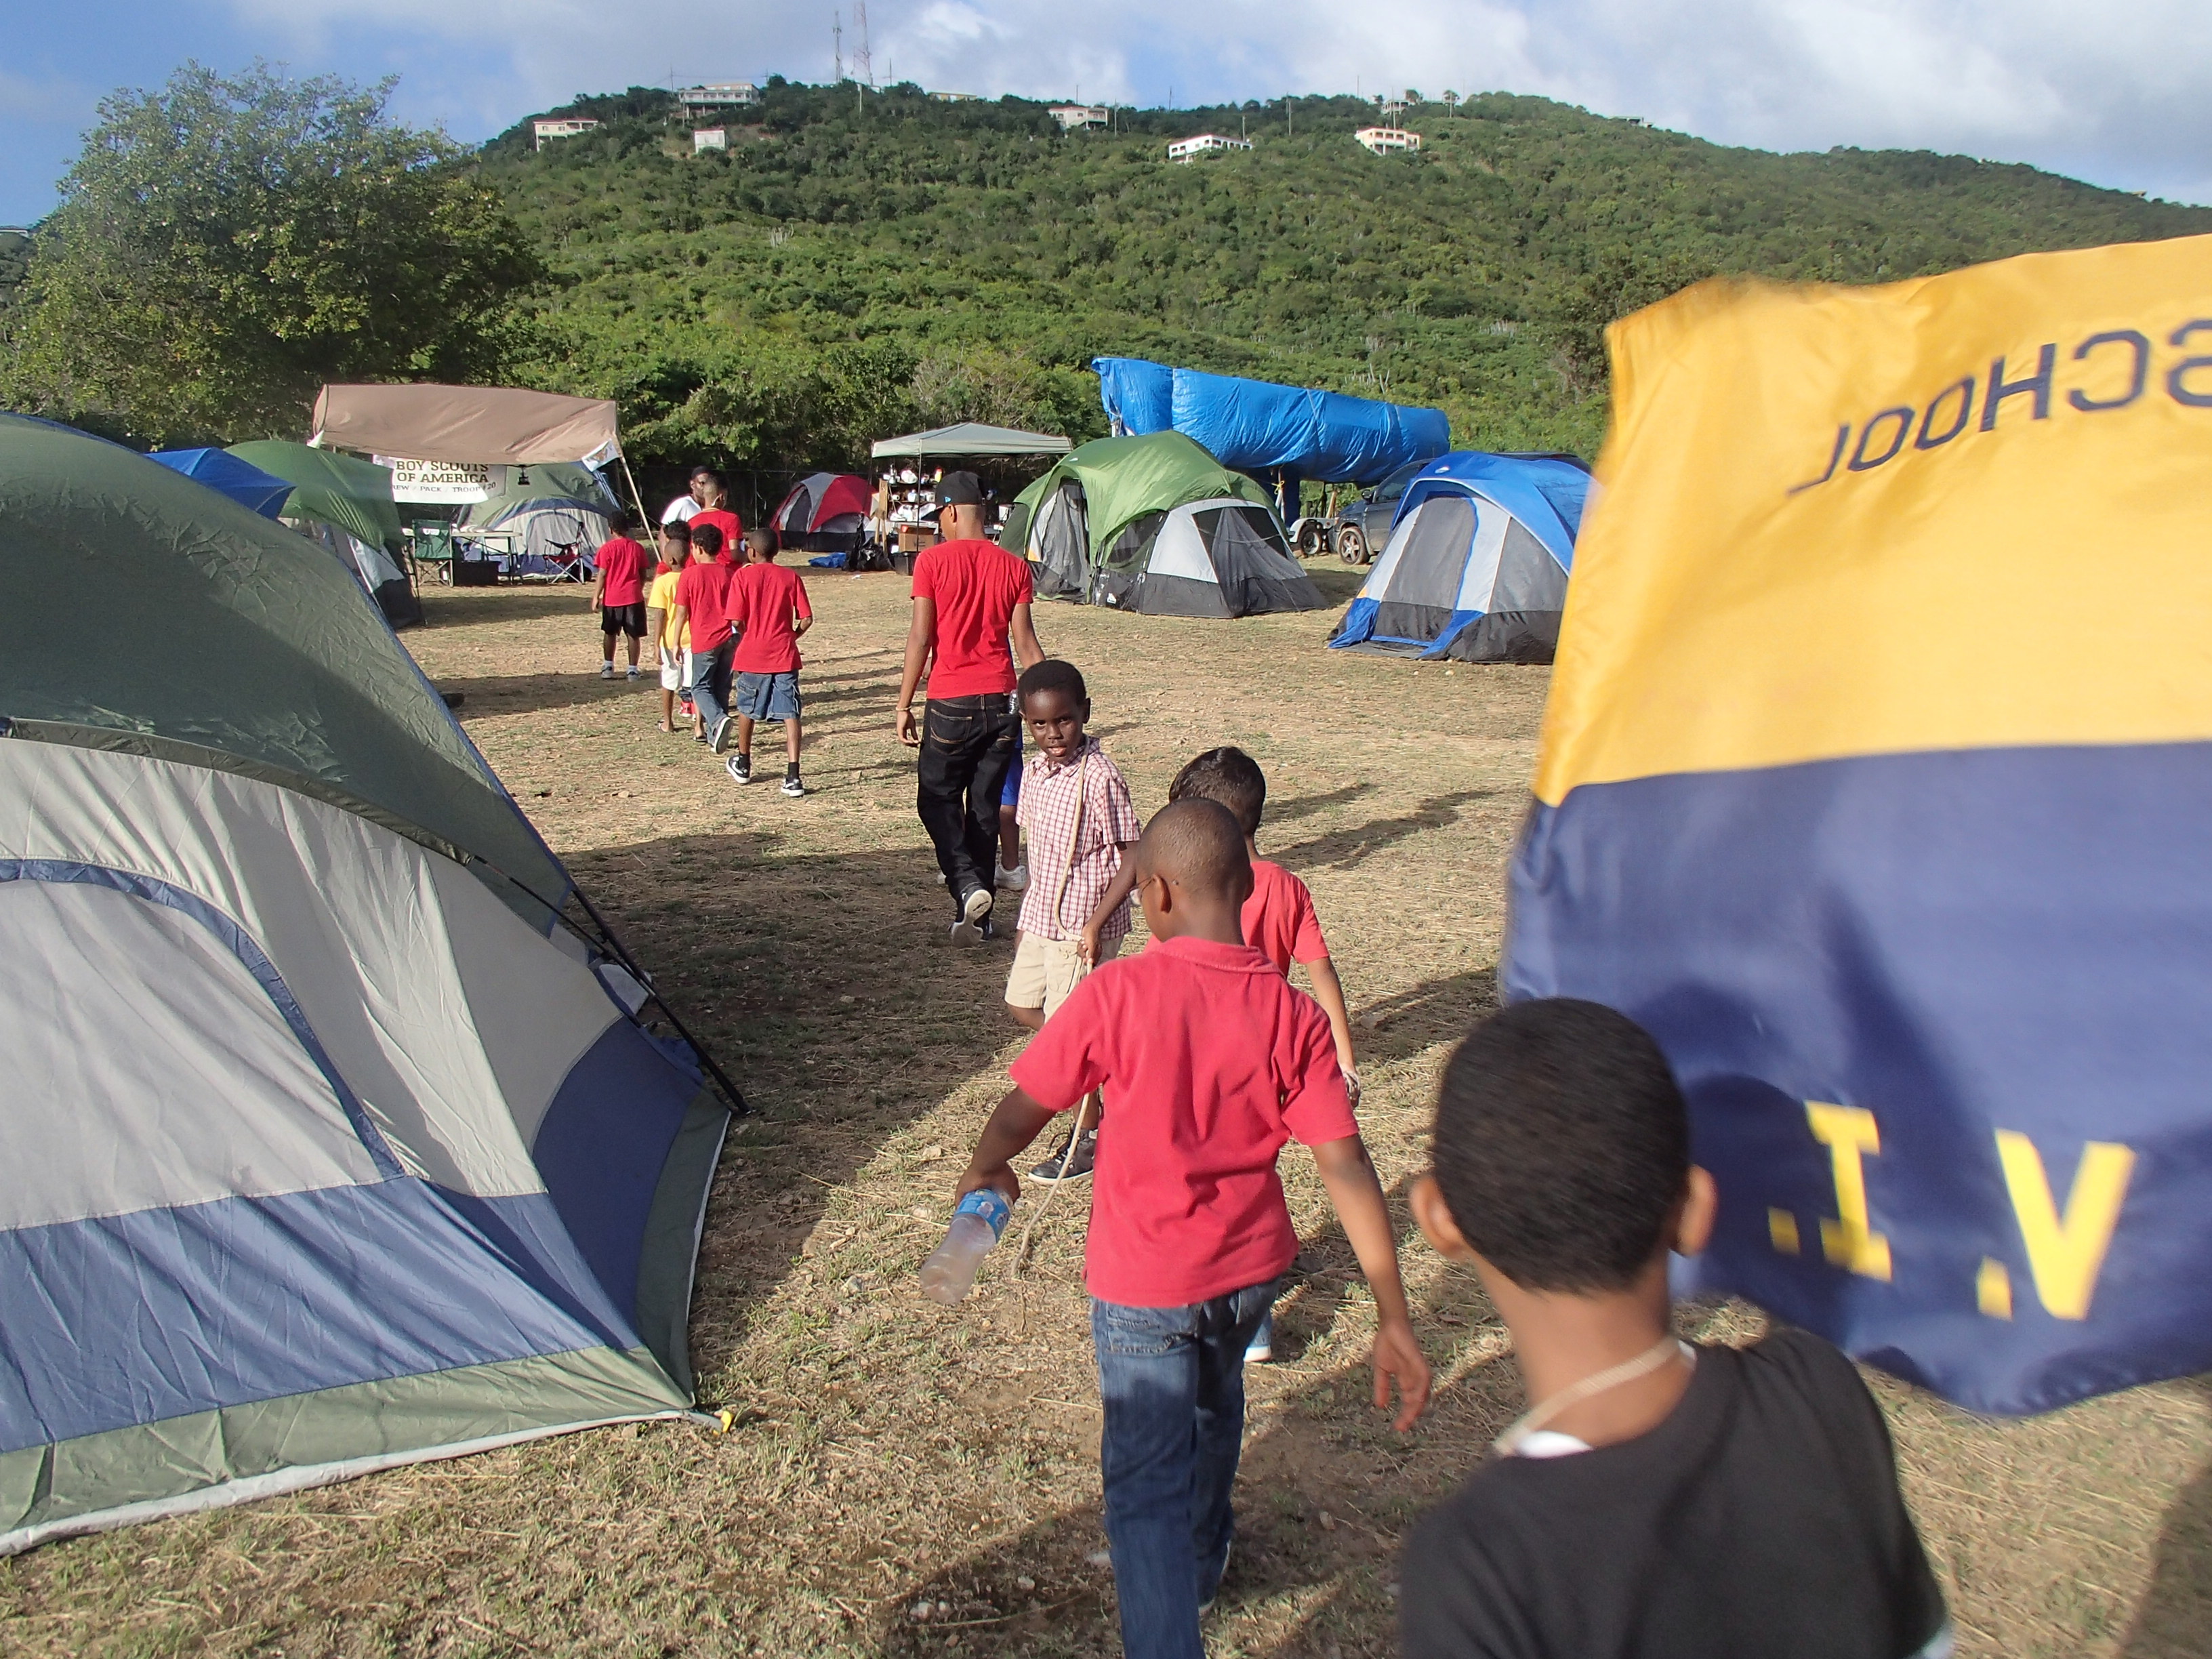 Scouts walk through their camp to a knot-tying lesson. (photo: Jimmy Loveland)